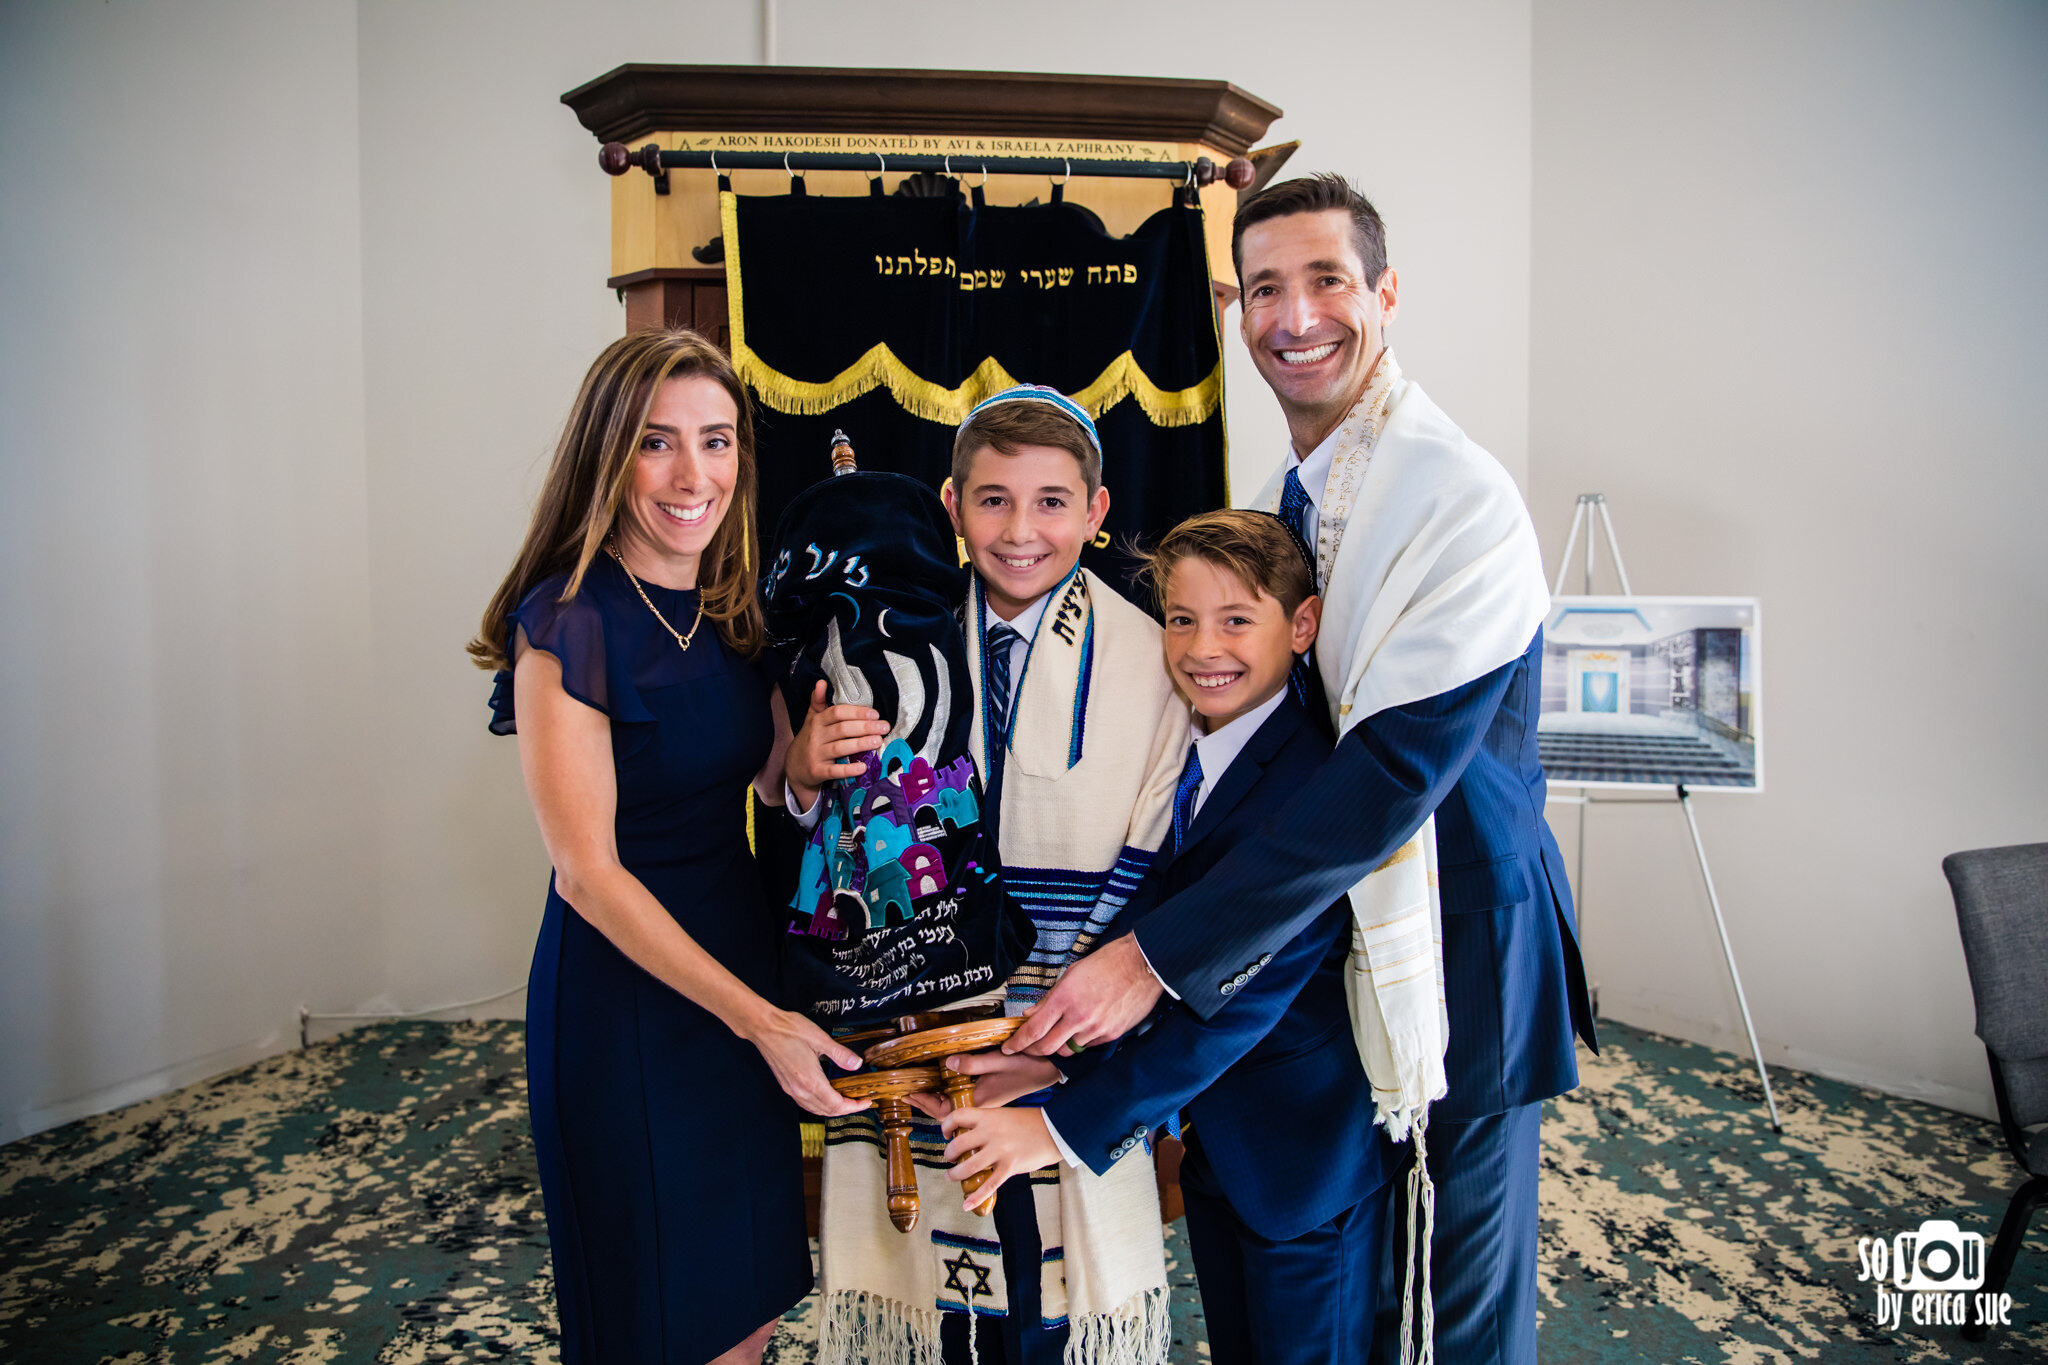 20-so-you-by-erica-sue-chabad-parkland-bar-mitzvah-photographer-2581.JPG